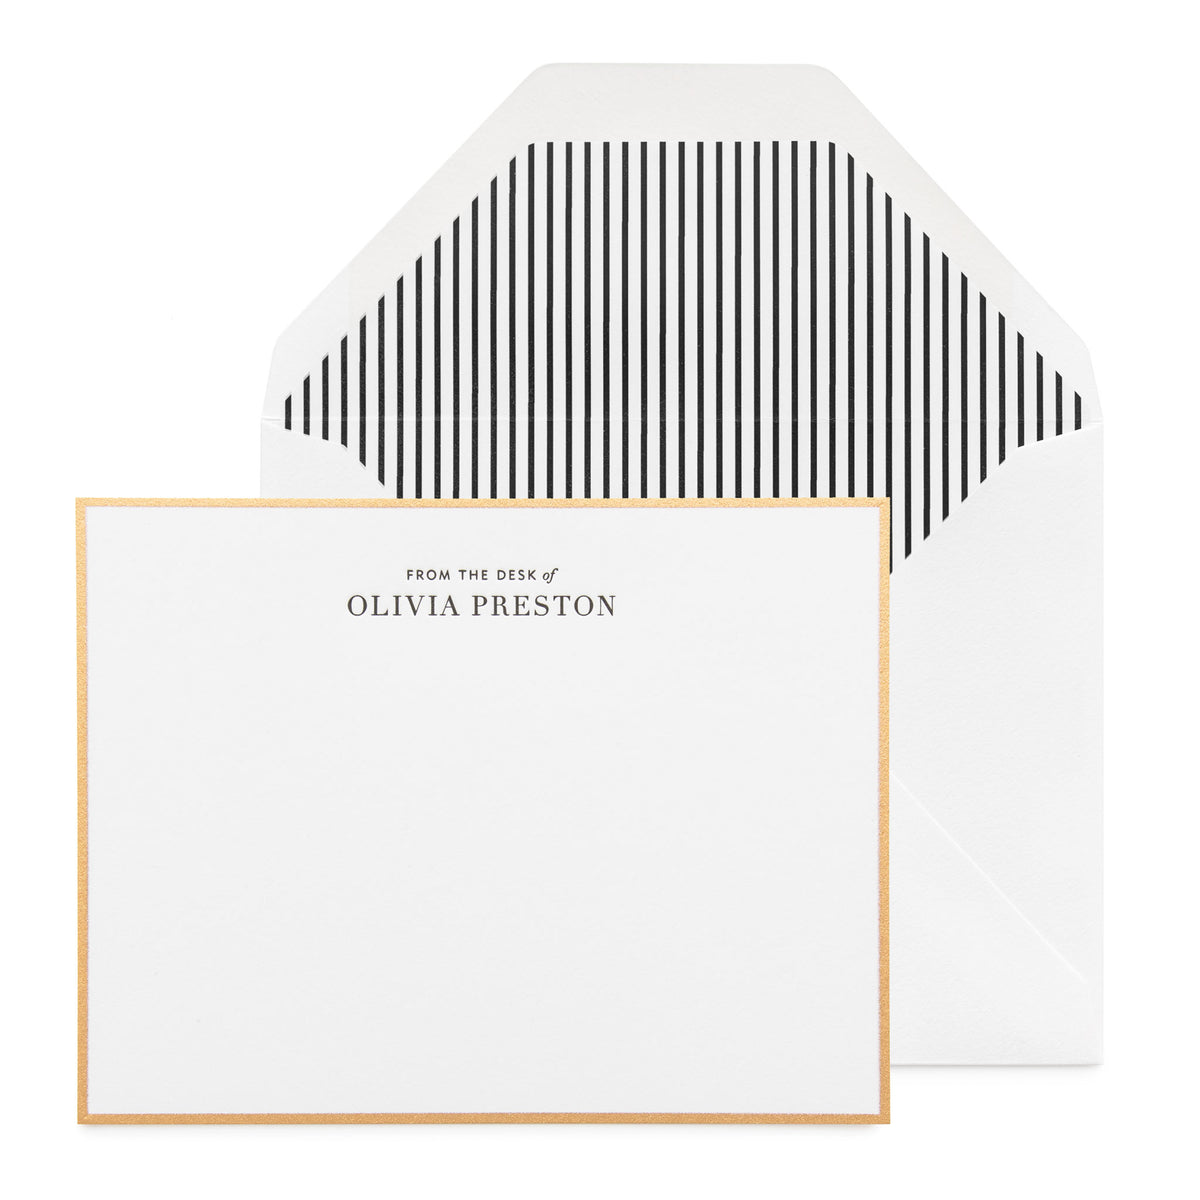 Black and white custom stationery with from the desk of printed, gold border and vertical stripe liner